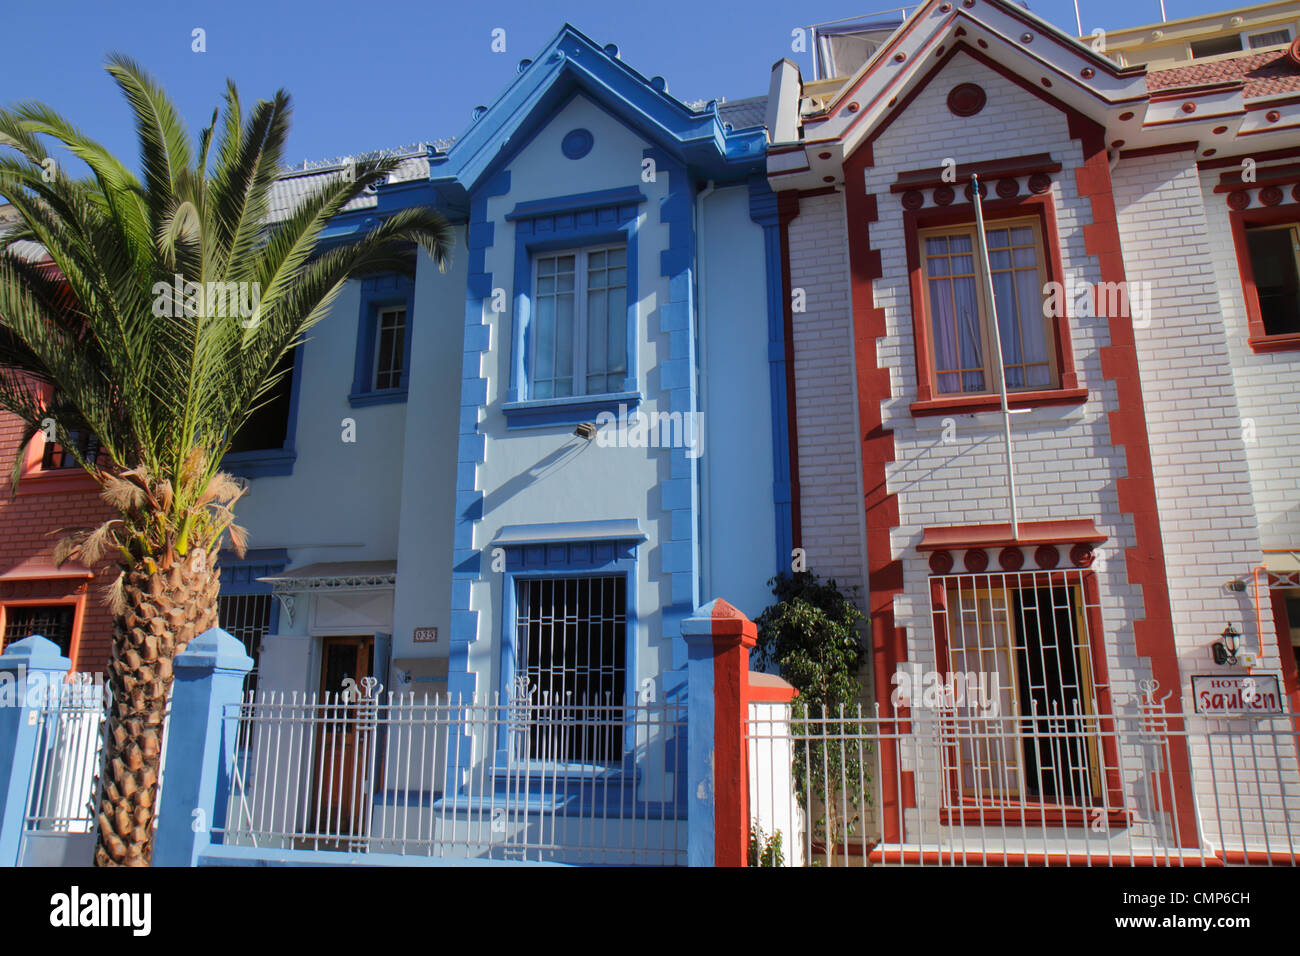 Santiago Chile,Providencia,Vina del Mar,neighborhood,housing,attached homes,house home houses homes residence,two story,bright color paint job,wrought Stock Photo